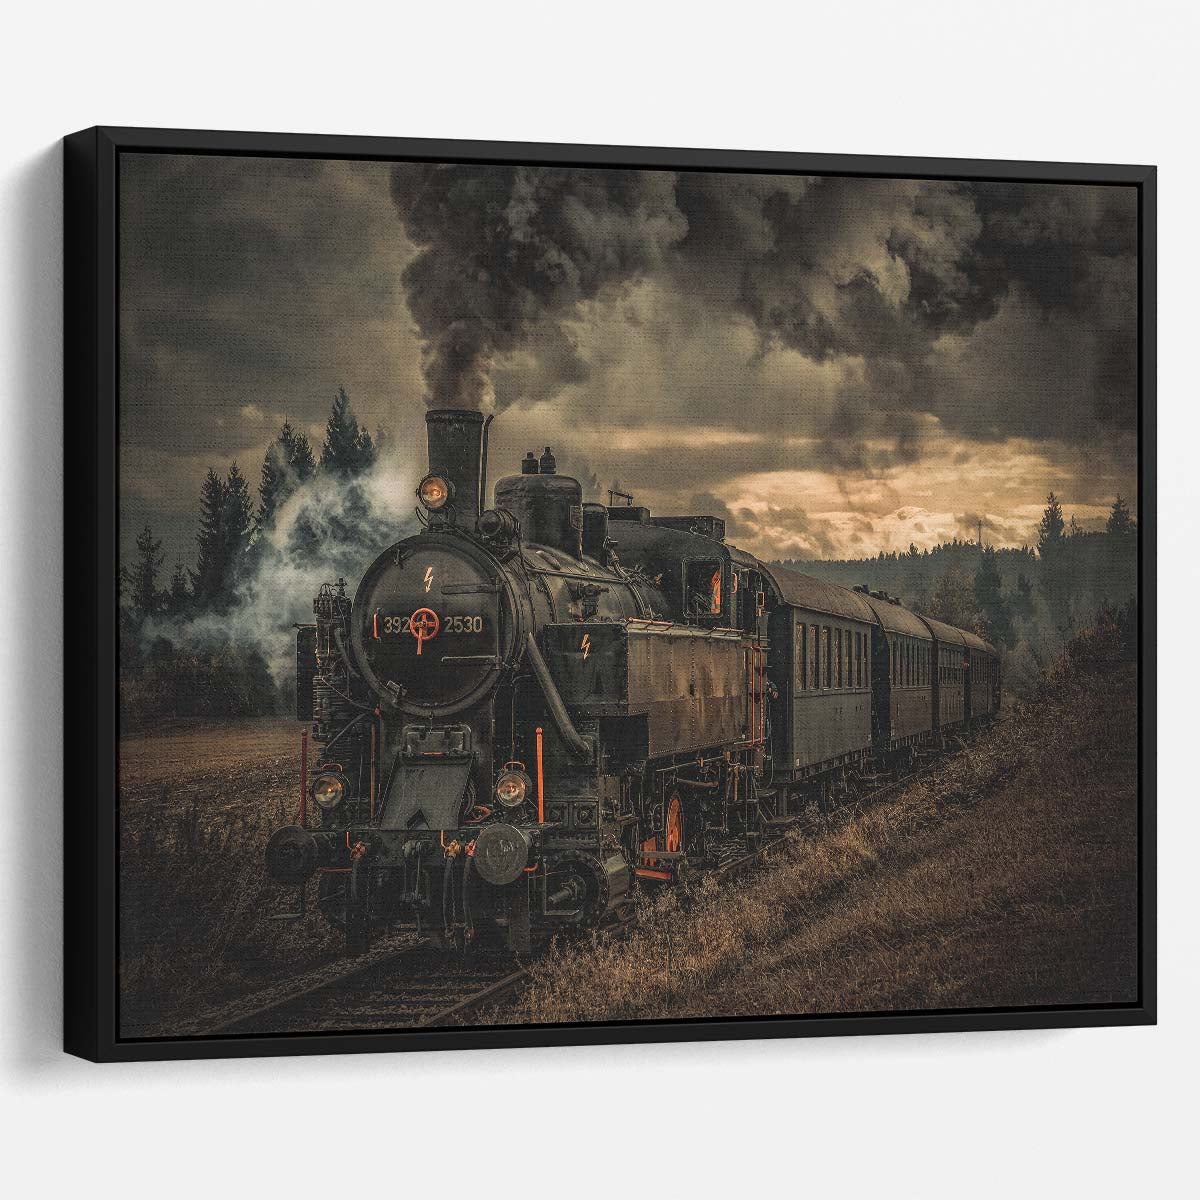 Vintage Steam Train Engine Action Photography Wall Art